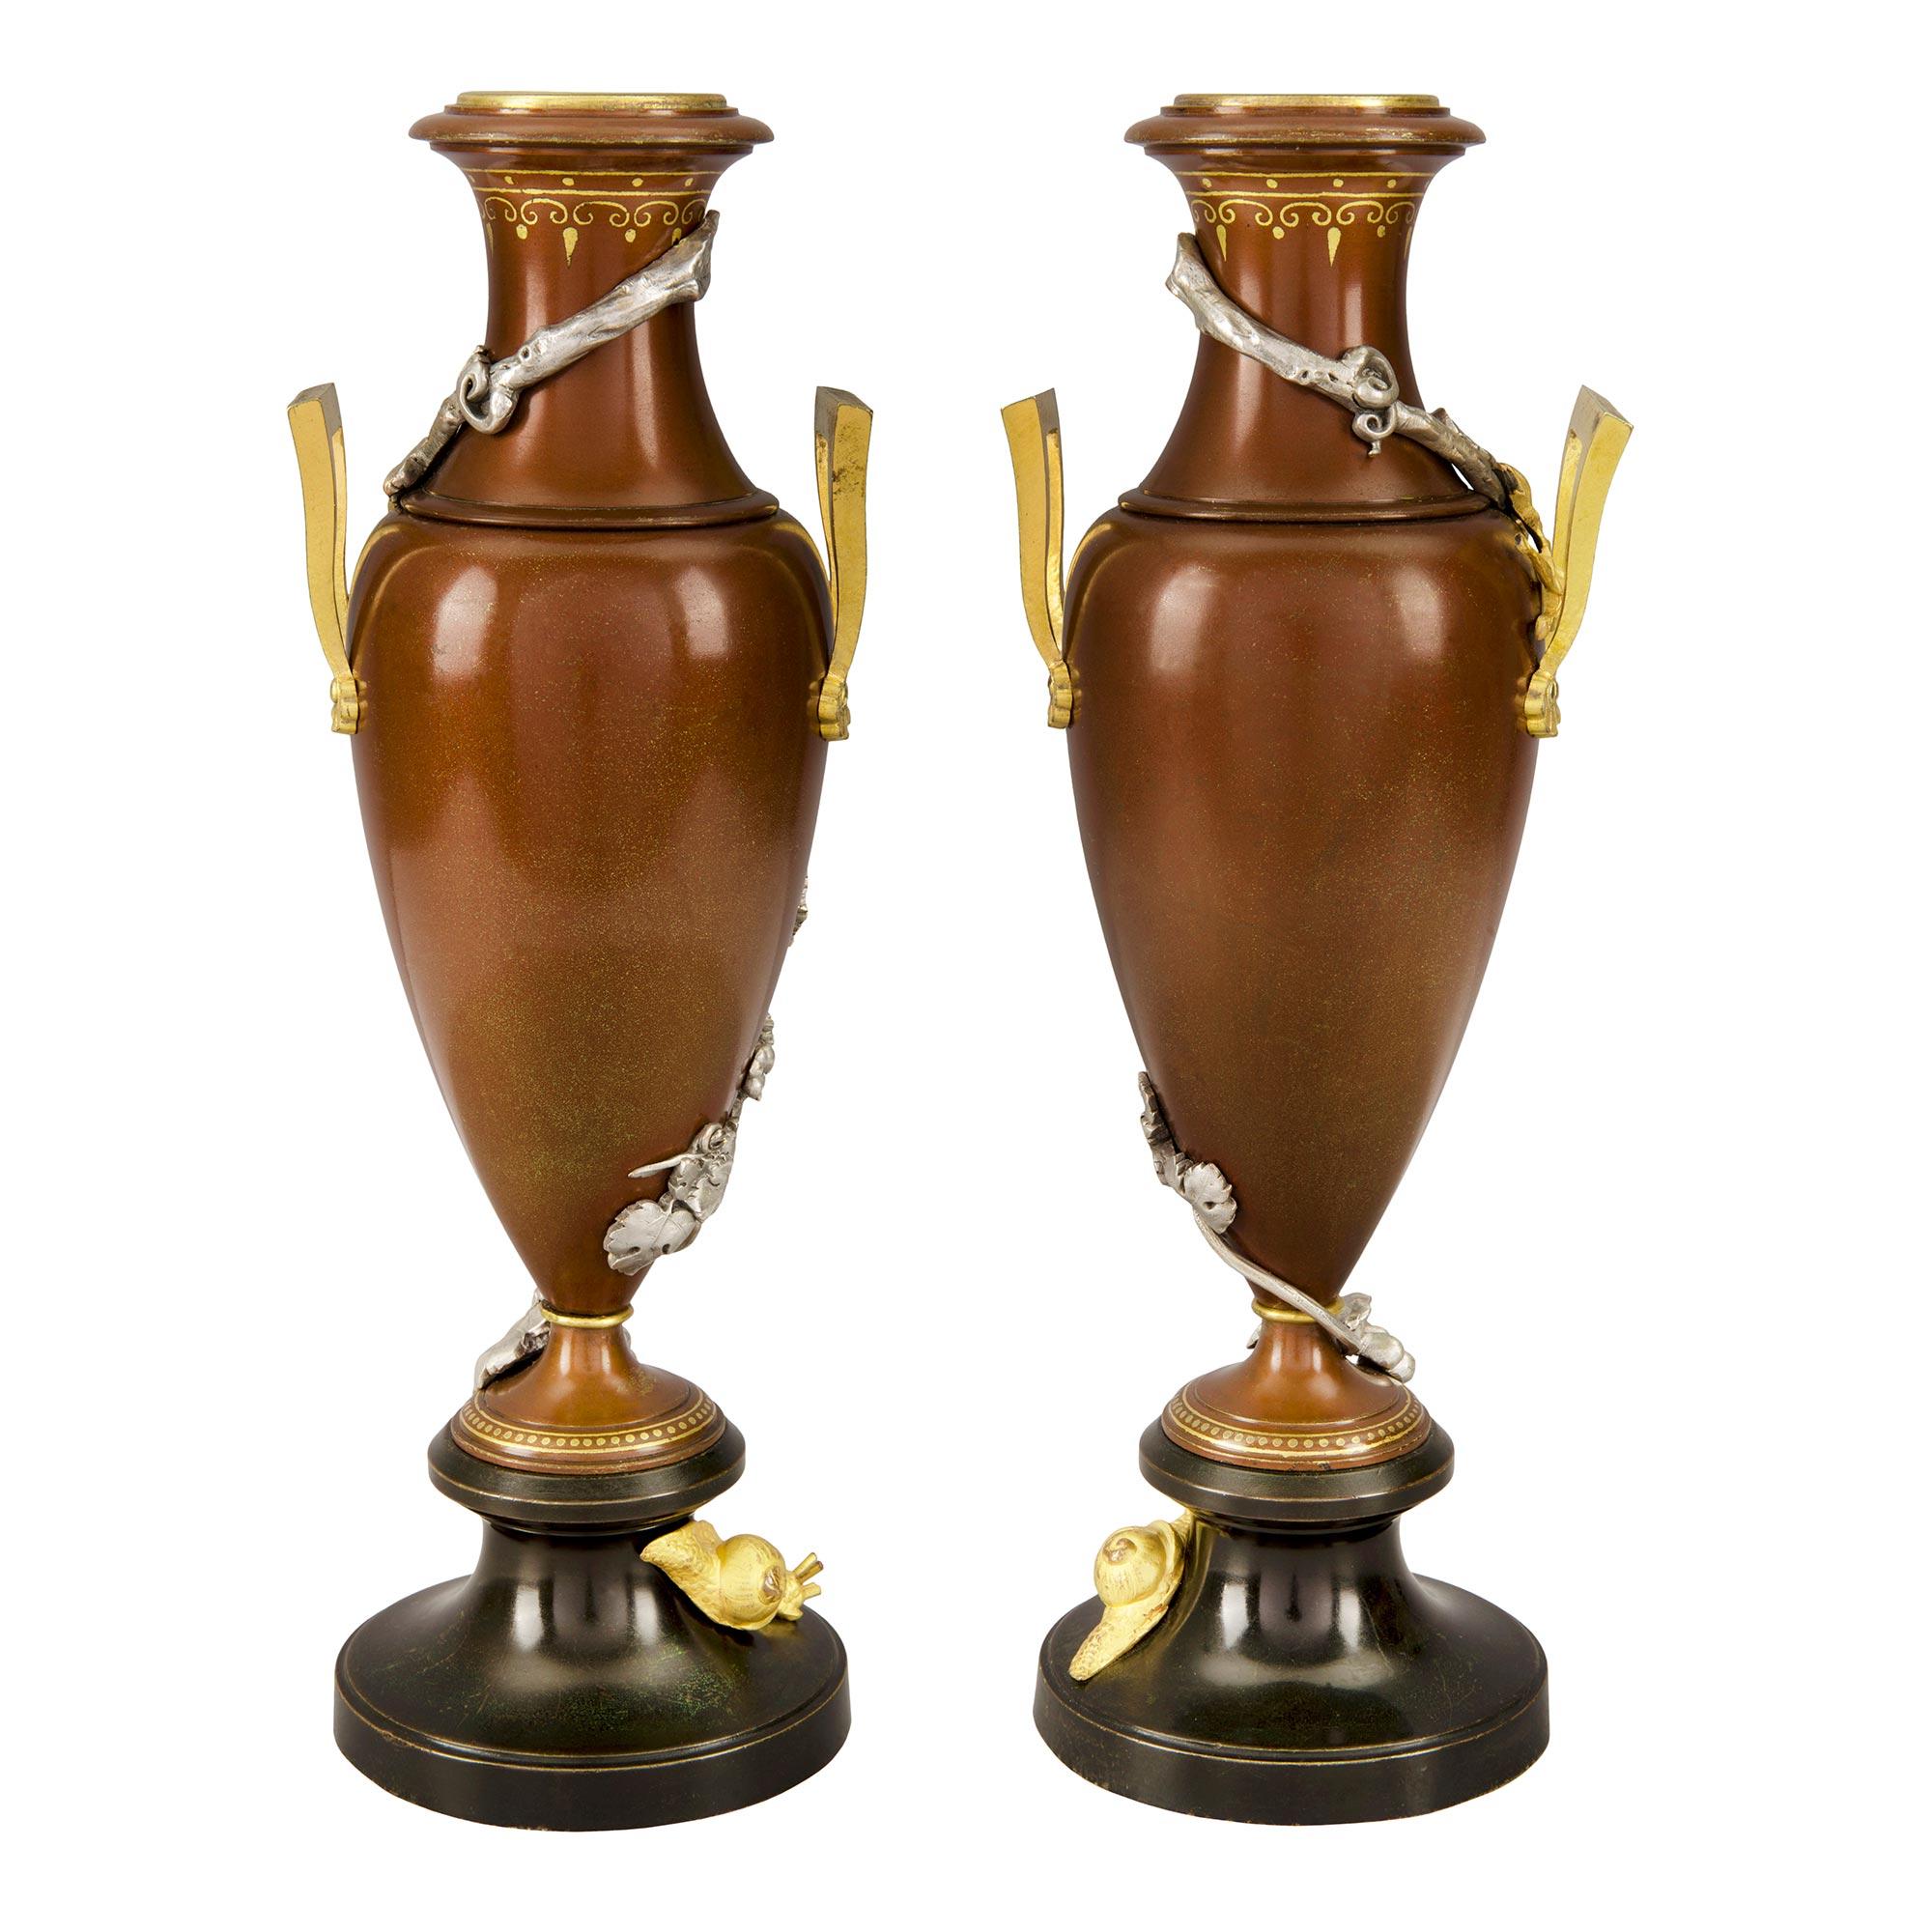 Pair of French 19th Century Louis XVI Style Ormolu and Bronze Urns In Good Condition For Sale In West Palm Beach, FL